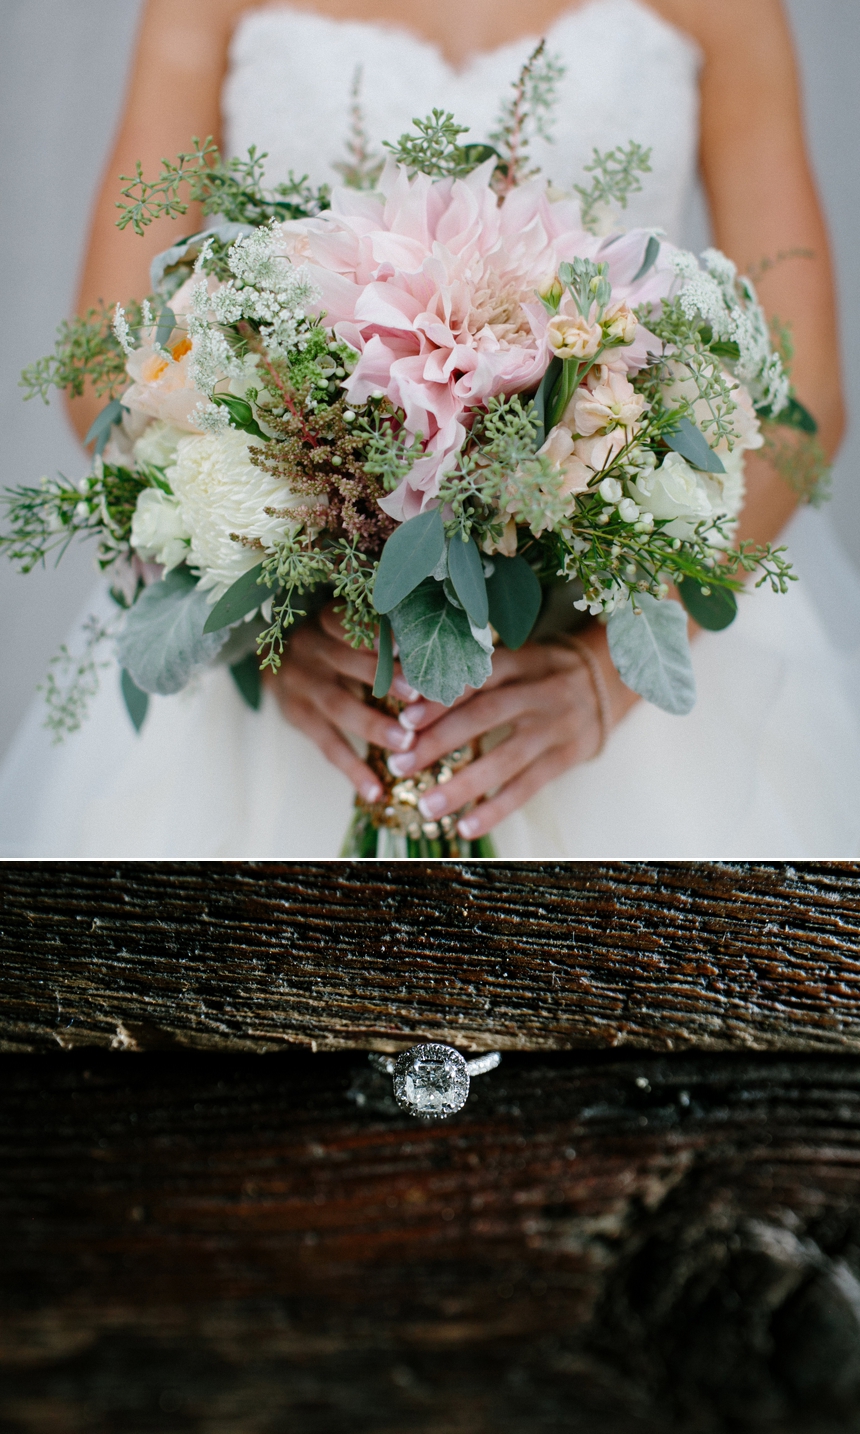 gorgeous bridal bouquet from Seven Sister Designs in Snohomish Washington